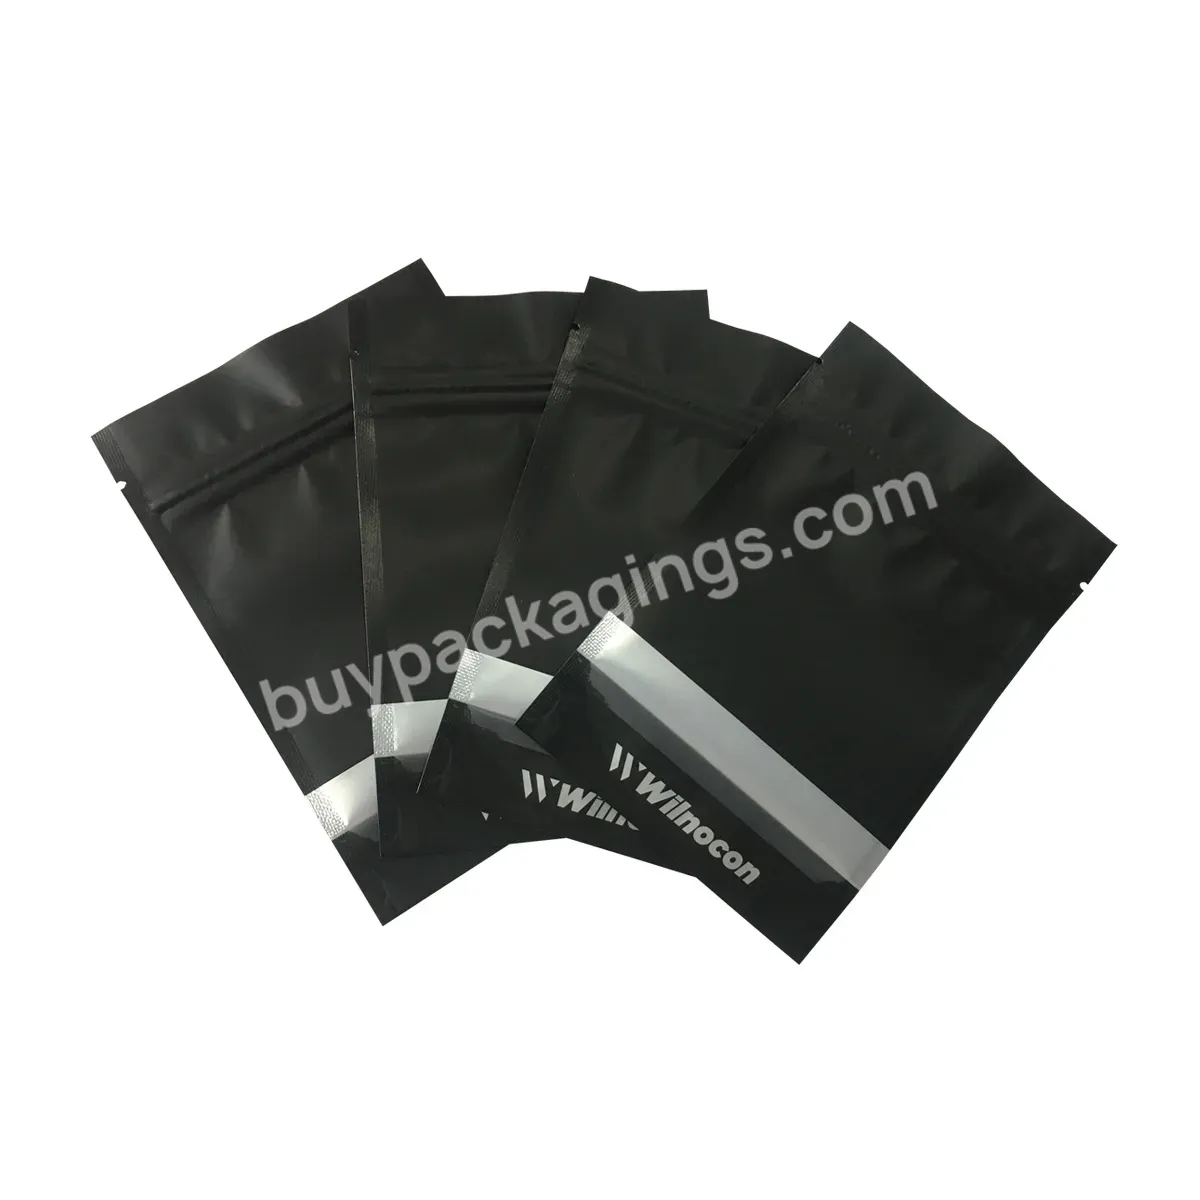 Hot Sale 3 X 4 Inch 4 X 6 Inch Stand Up Matte Black Smell Proof Mylar Custom Printed Zip Lock Bags In Packaging Bags - Buy Custom Printed Zip Lock Bags,Custom Printed Zip Lock Bags In Packaging Bags,Smell Proof Mylar Custom Printed Zip Lock Bags.